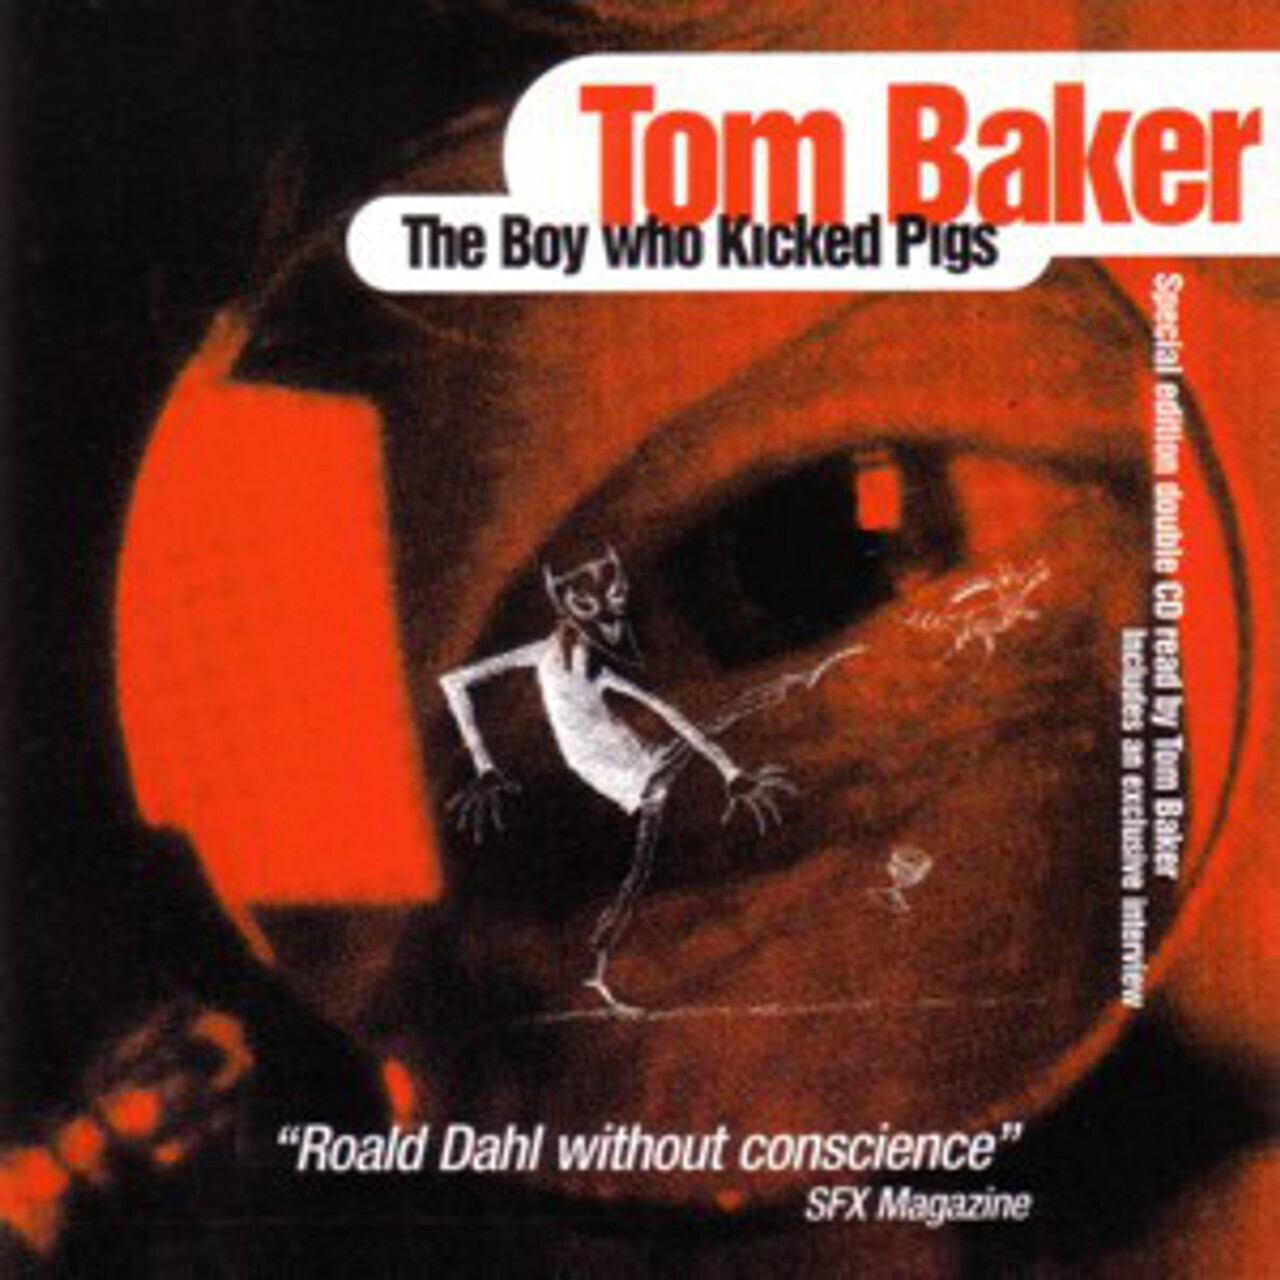 The Boy Who Kicked Pigs & Tom Baker Interview (AIFF & MP3 AUDIO DOWNLOAD)